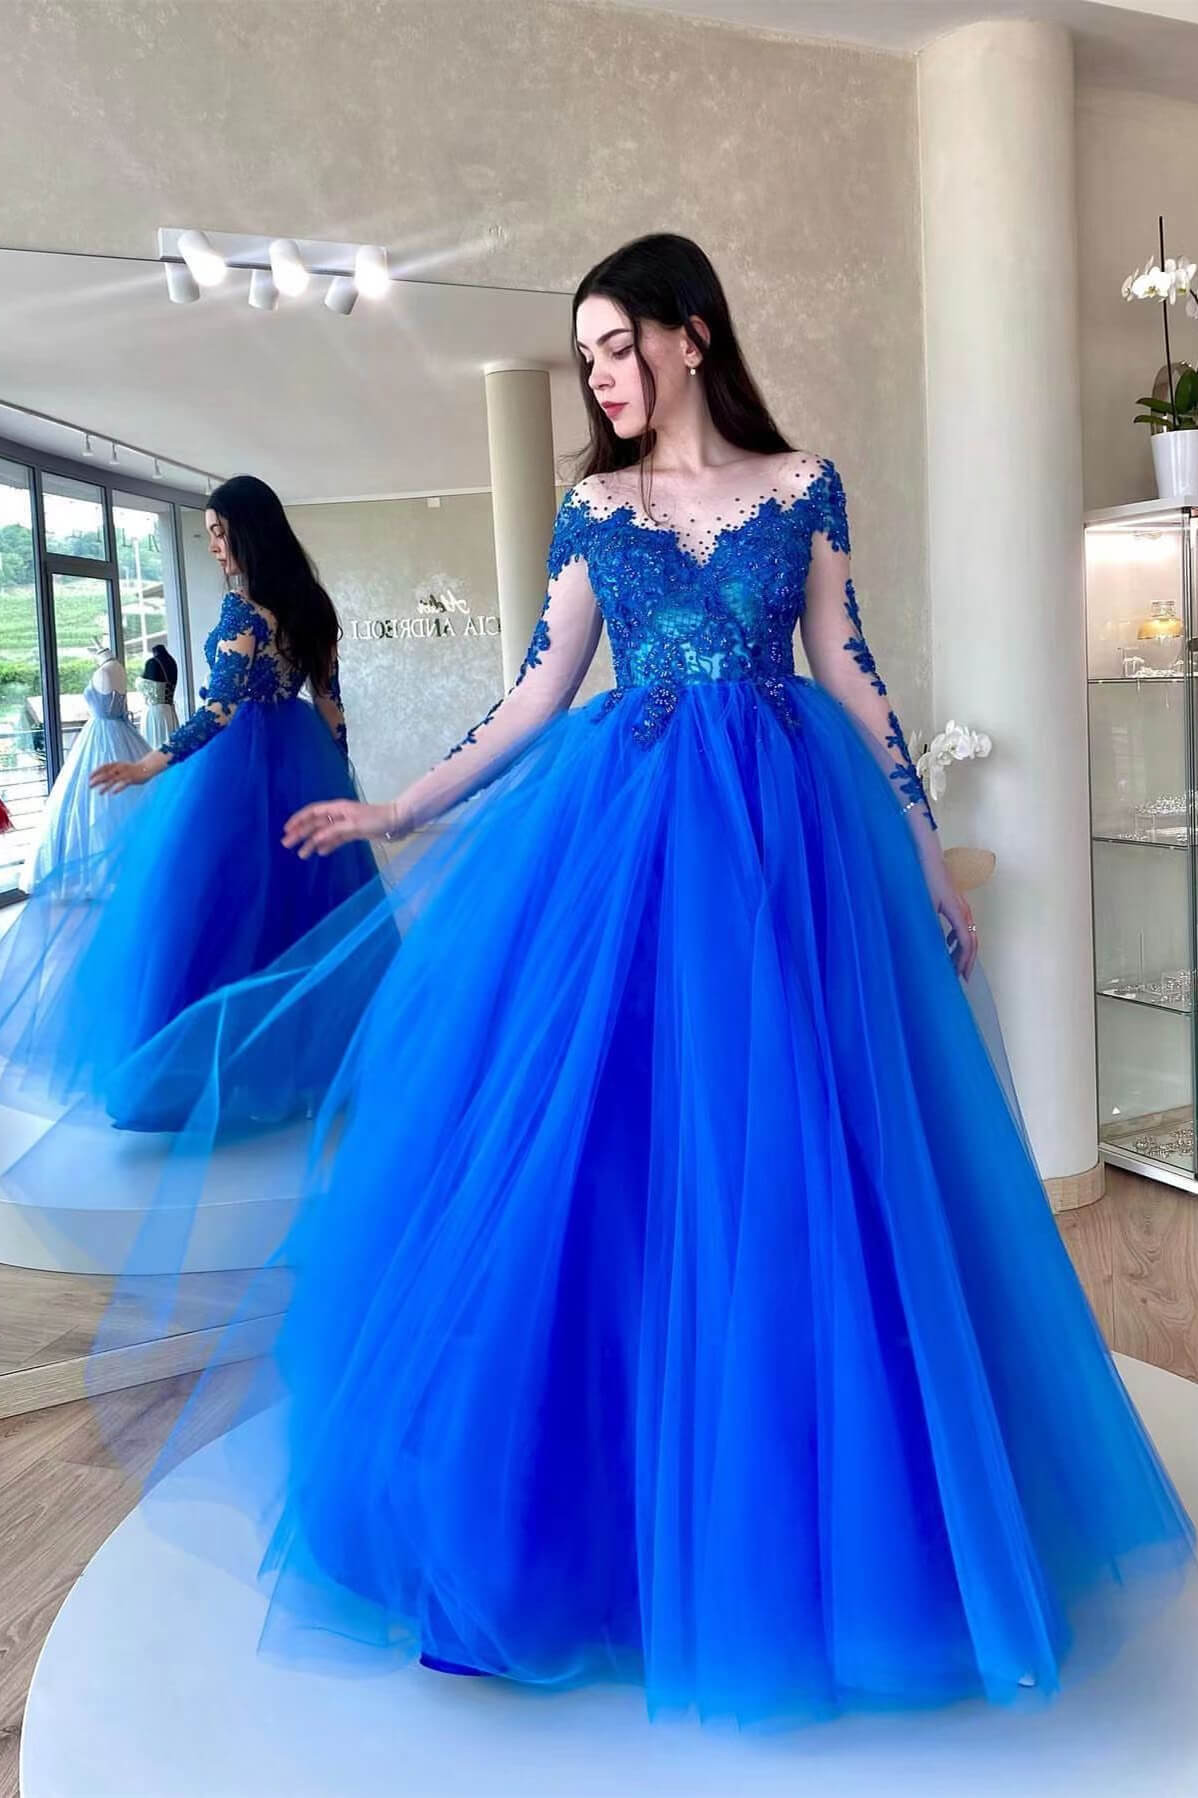 Oknass Royal Blue Long Sleeves Tulle Prom Dress With Appliques Amazing